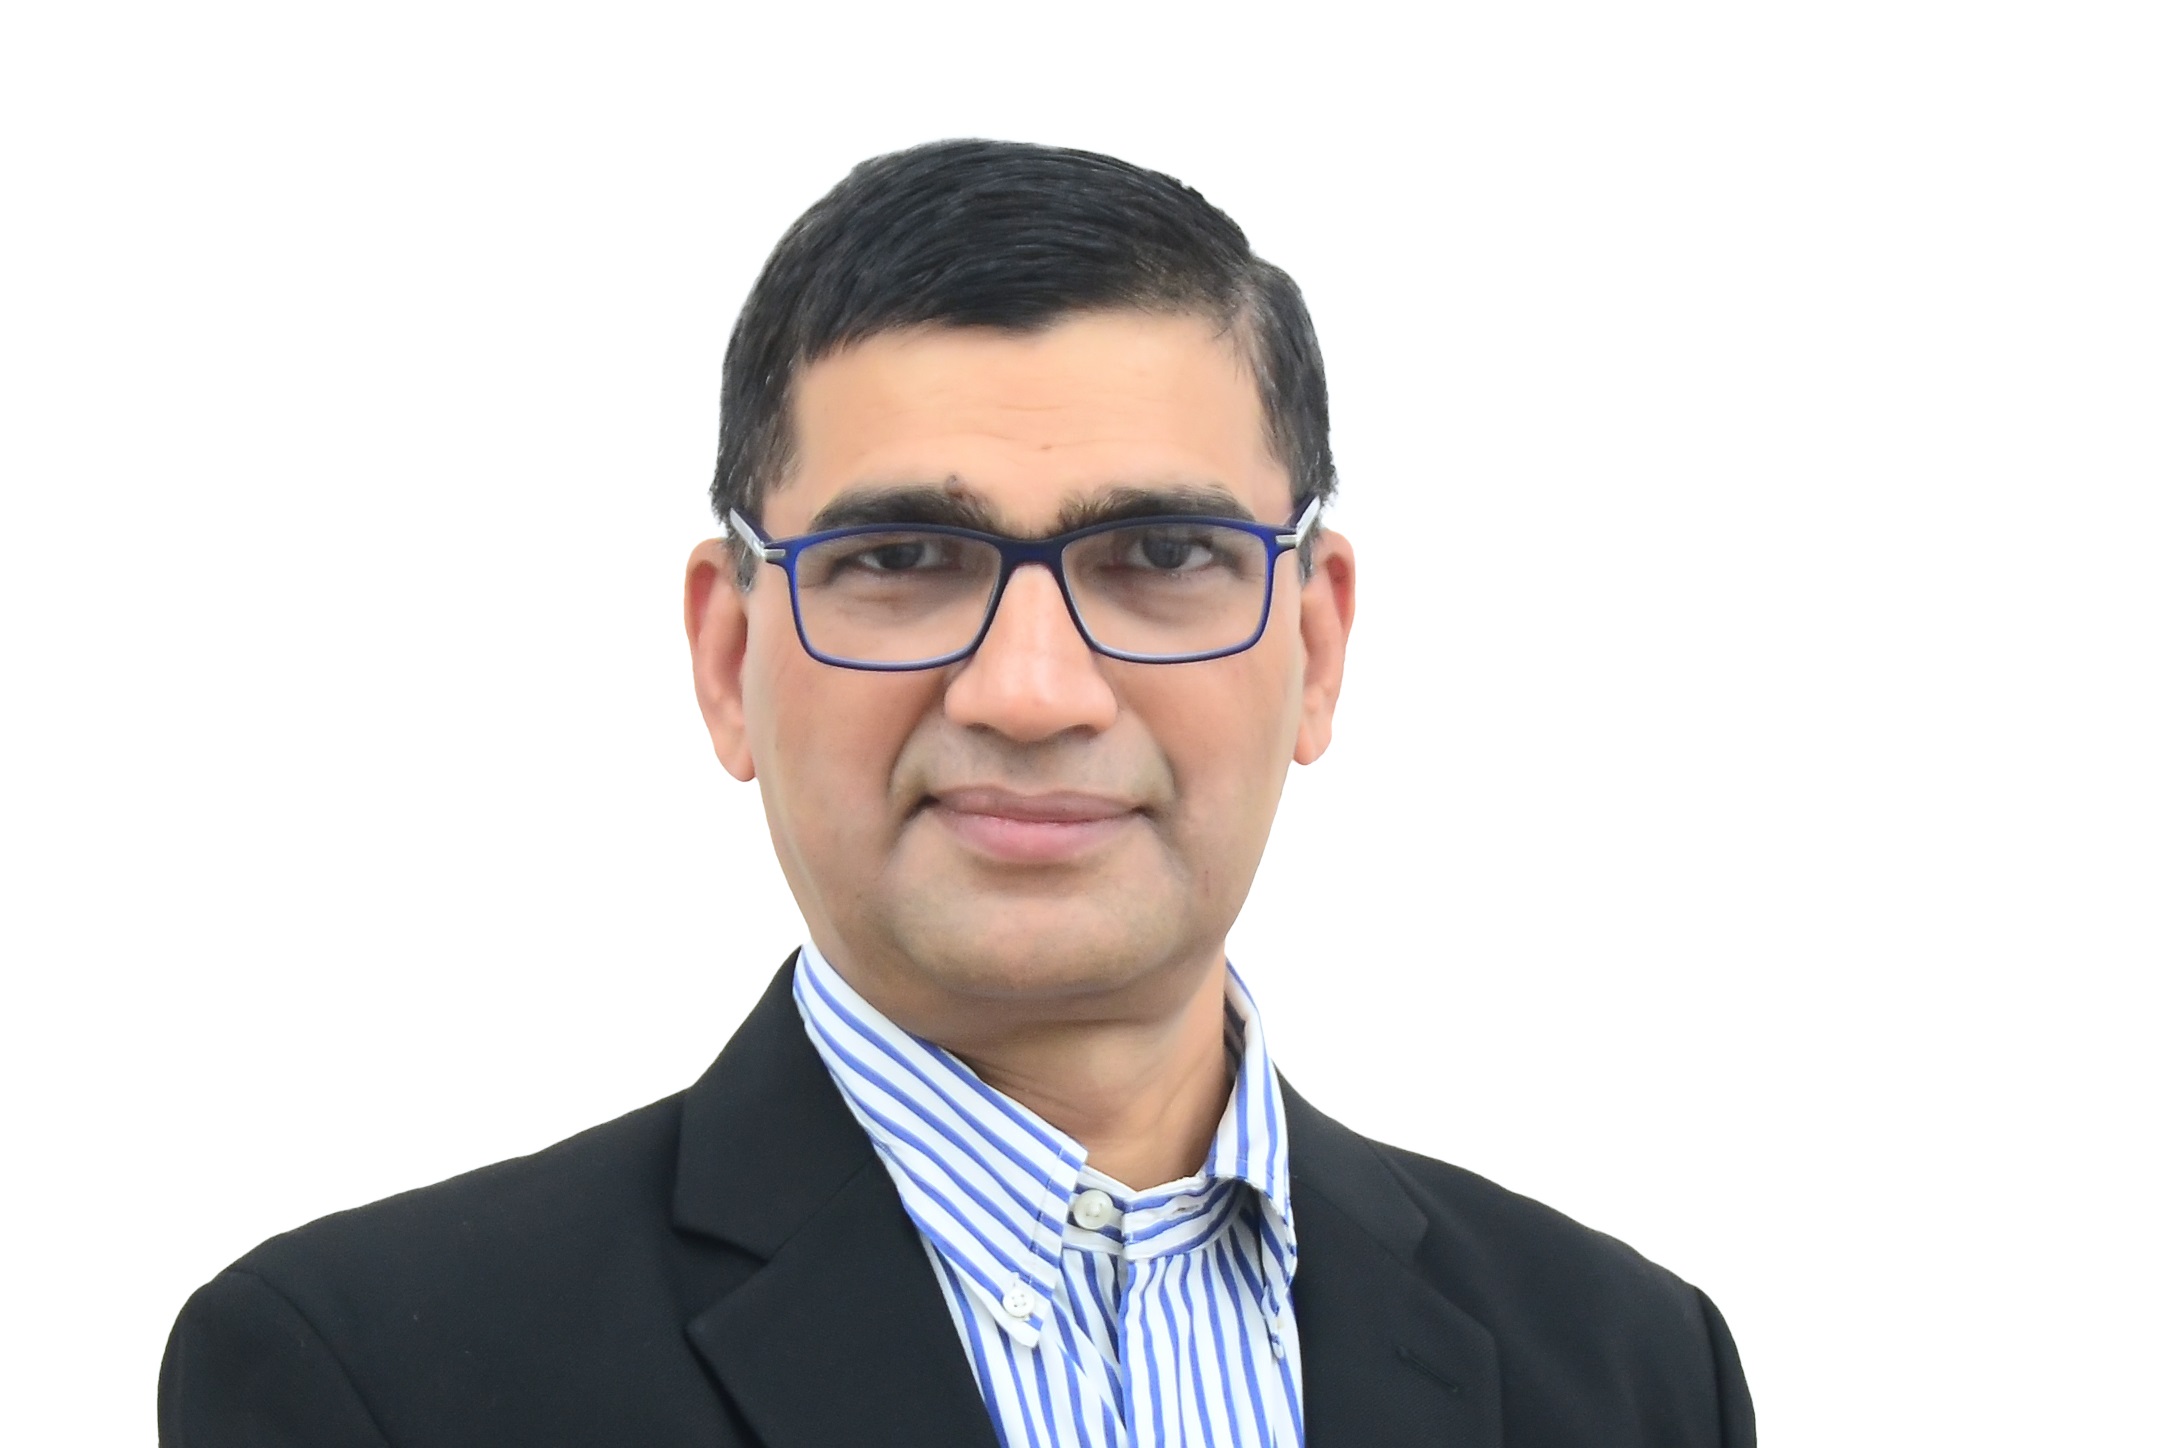 Jindal Stainless Appoints Sanjay Mishra as Chief Digital & Information Officer